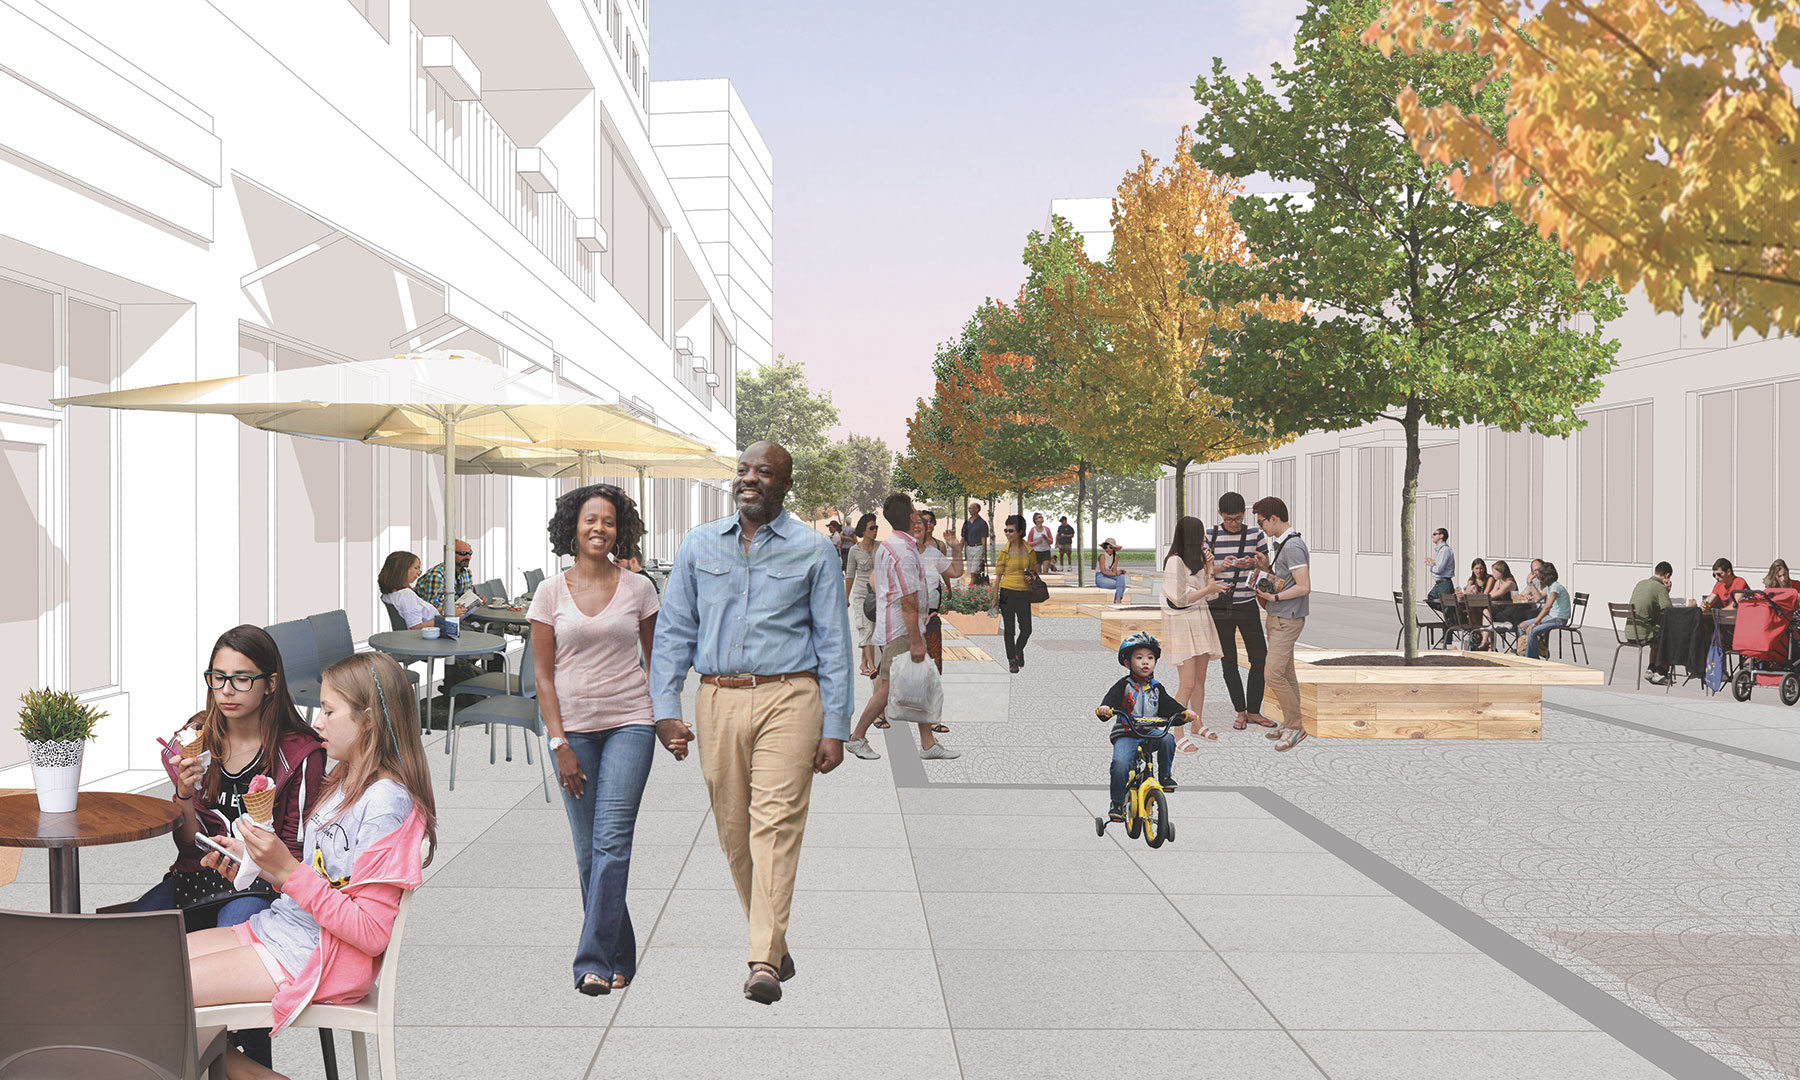 Proposed streetscape rendering of City Park Master Plan.